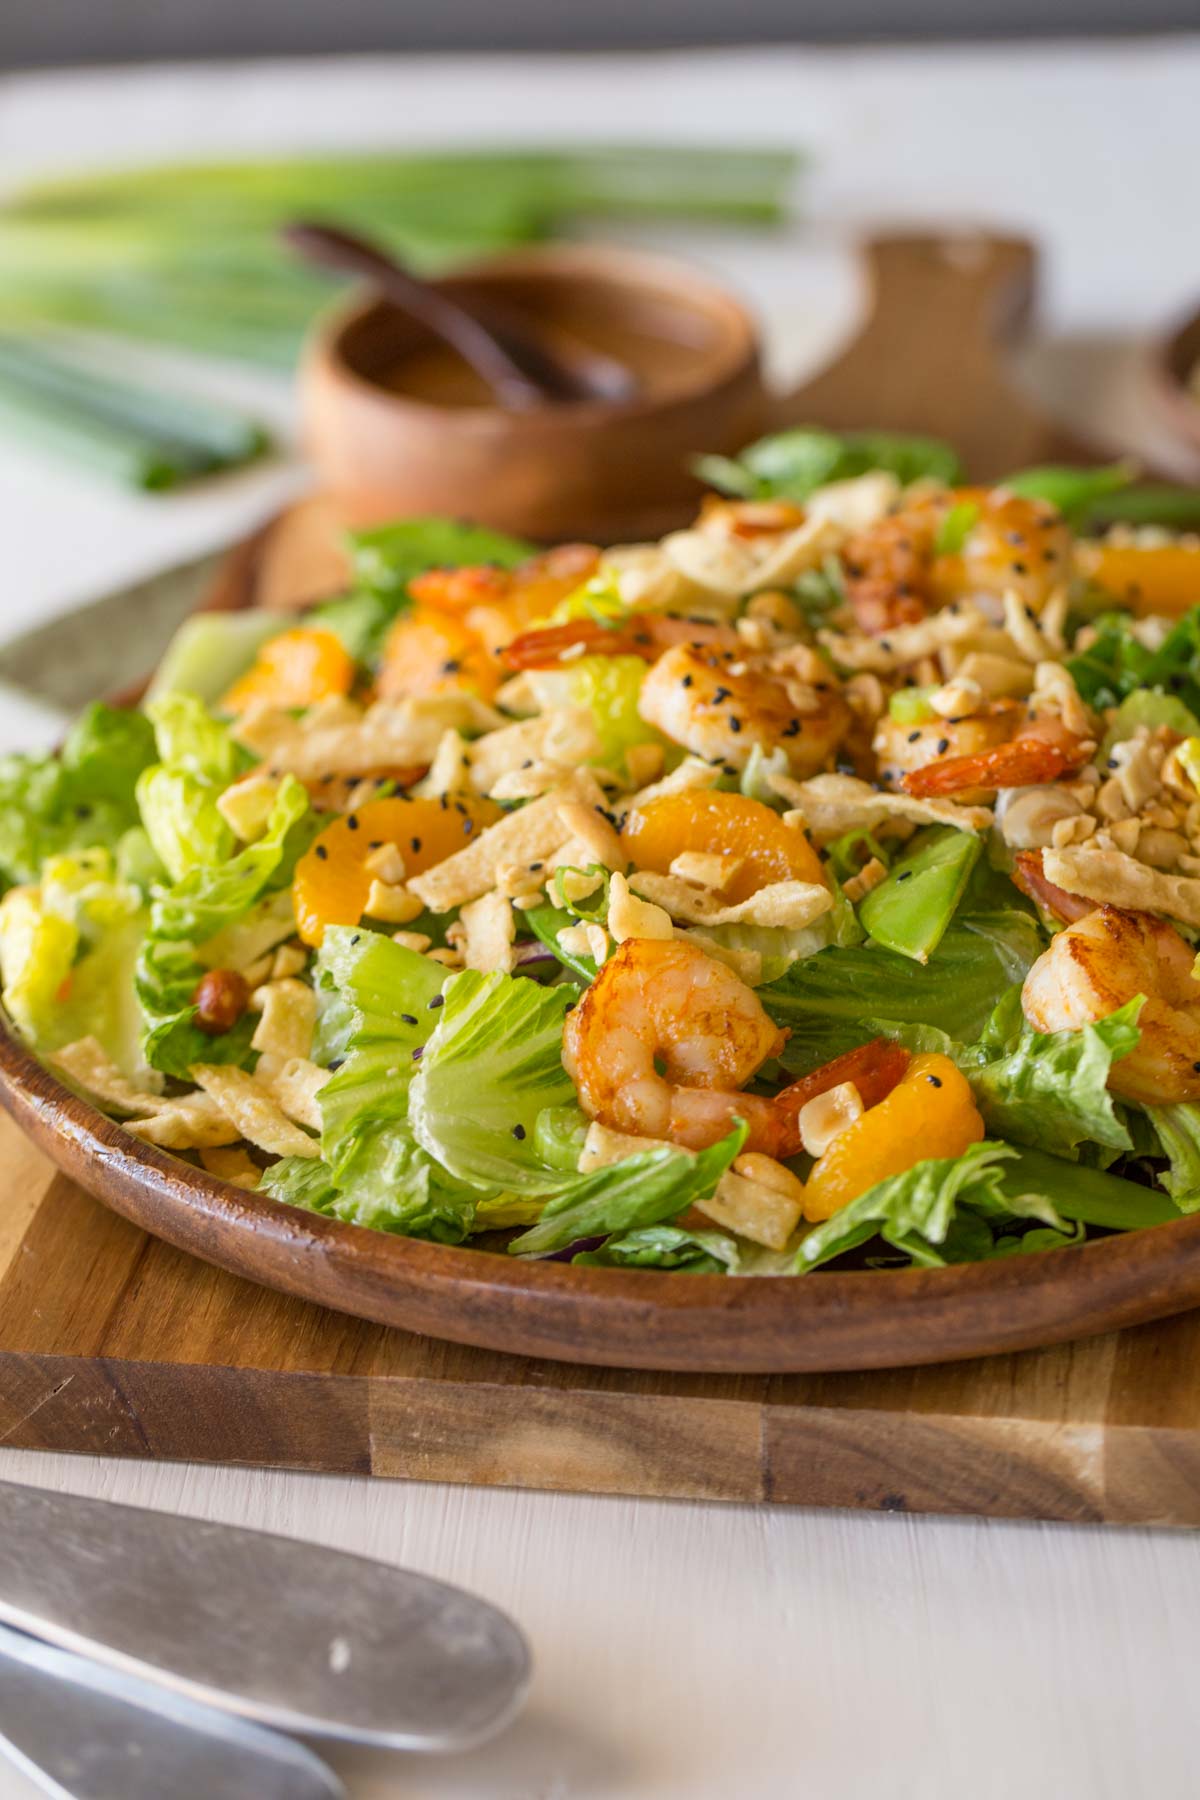 Shrimp Salad on a large serving plate, with a small wood bowl of the Spicy Peanut Dressing in the background.